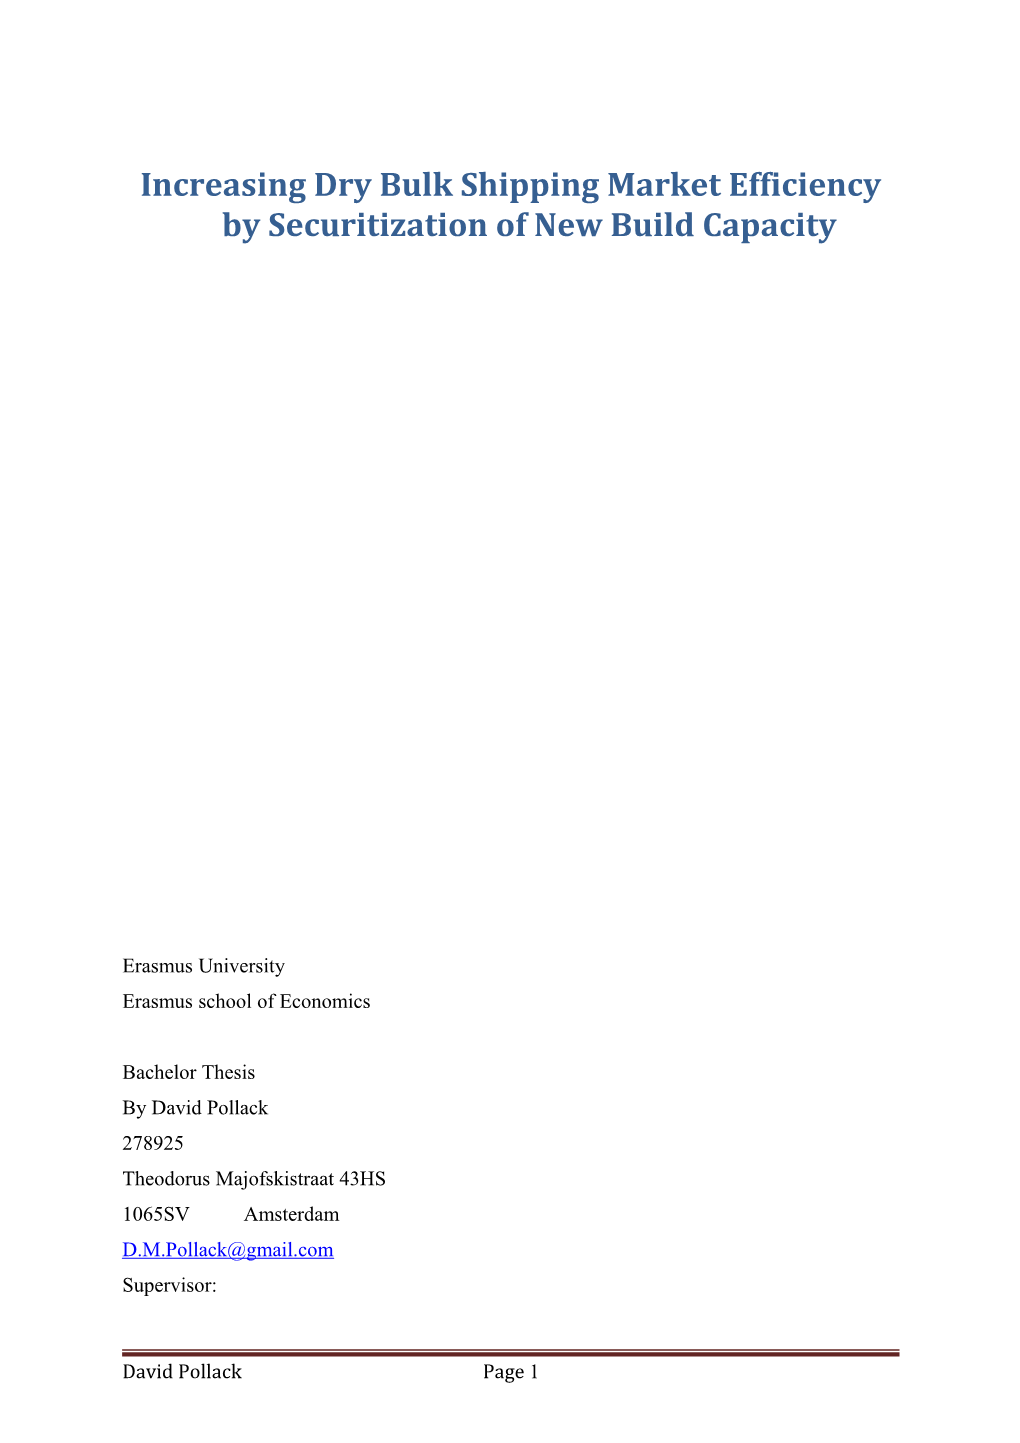 Increasing Dry Bulk Shipping Market Efficiency by Securitization of New Build Capacity